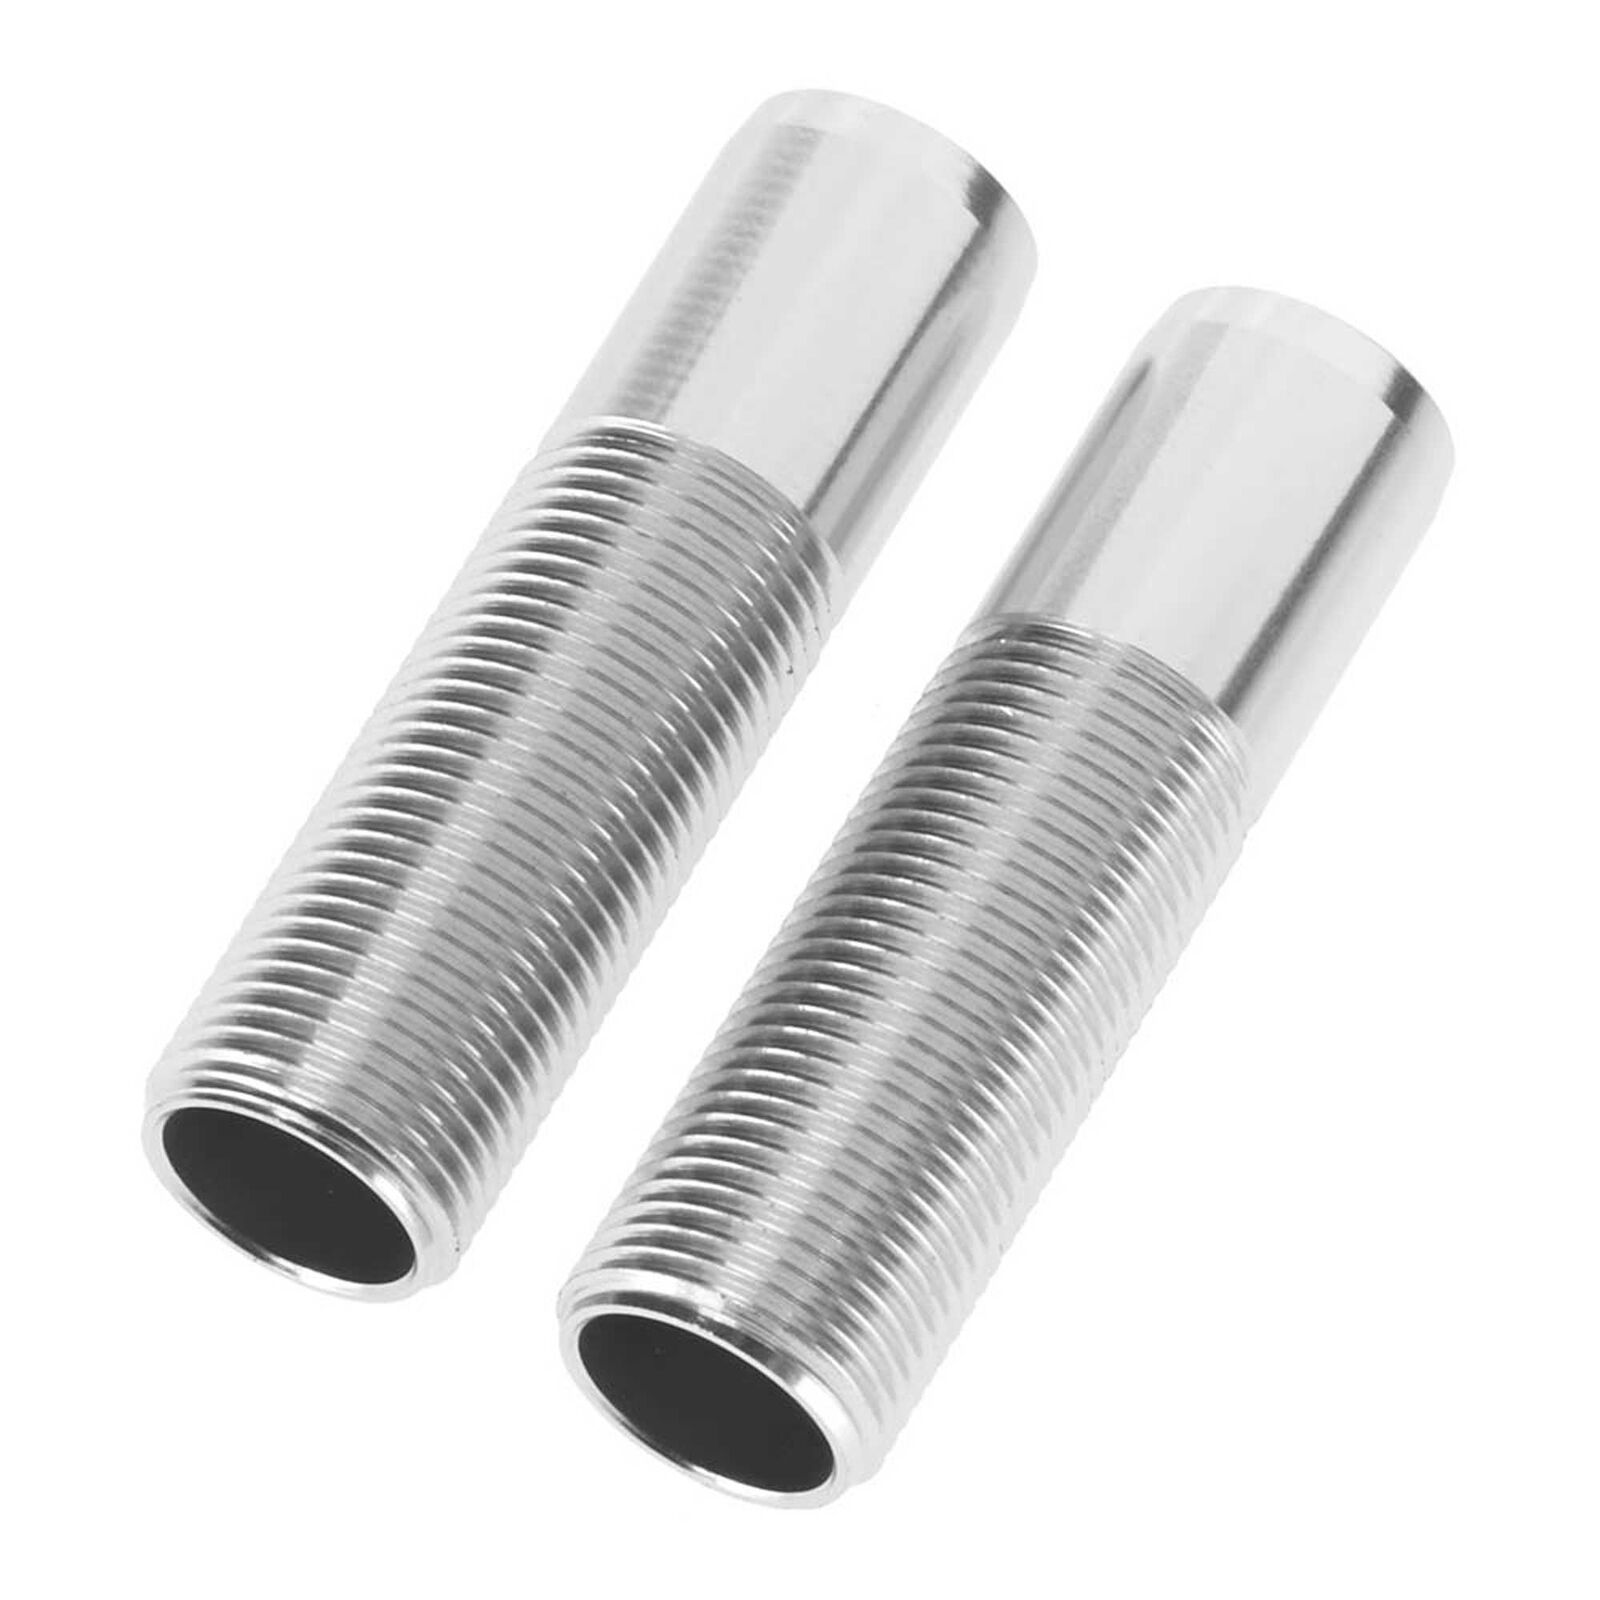 Aluminum Shock Body 12x47.5mm, Clear Anodized (2)a